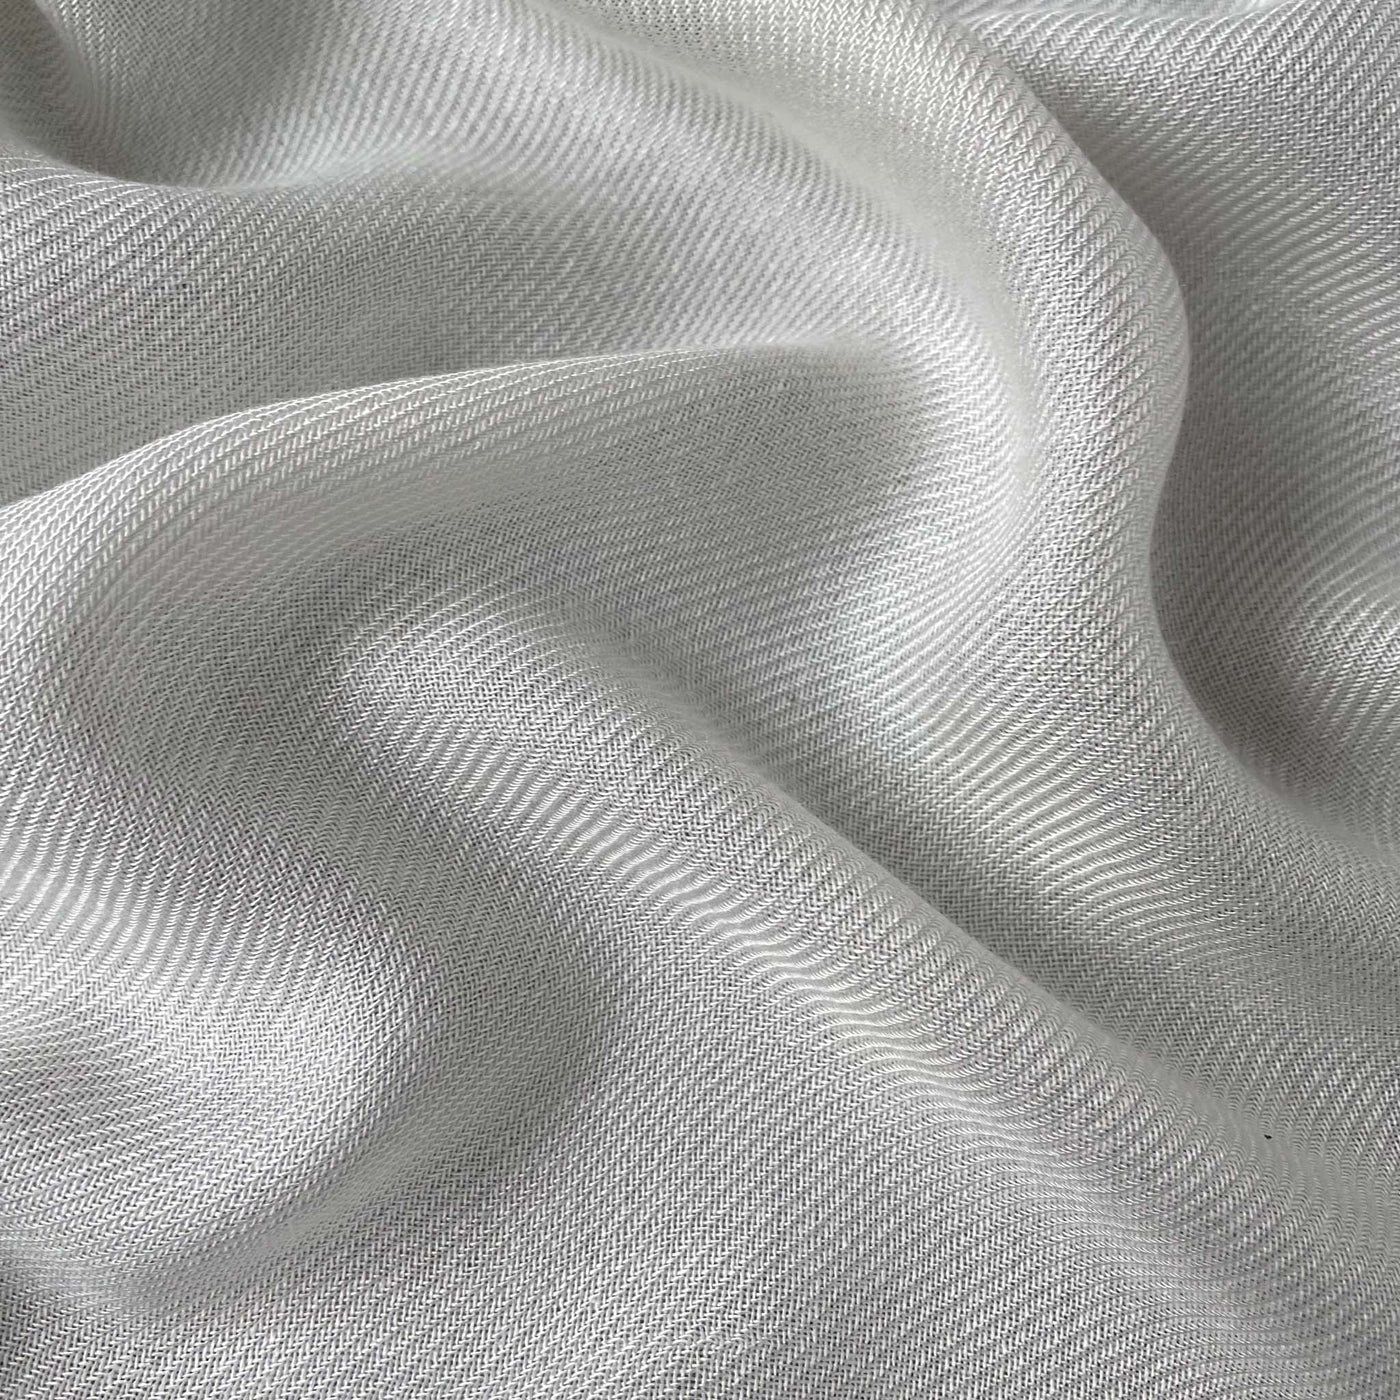 Fabric Pandit Fabric White Dyeable Pure Viscose Rayon Twill Plain Fabric (Width 36 Inches, 89 Gms)